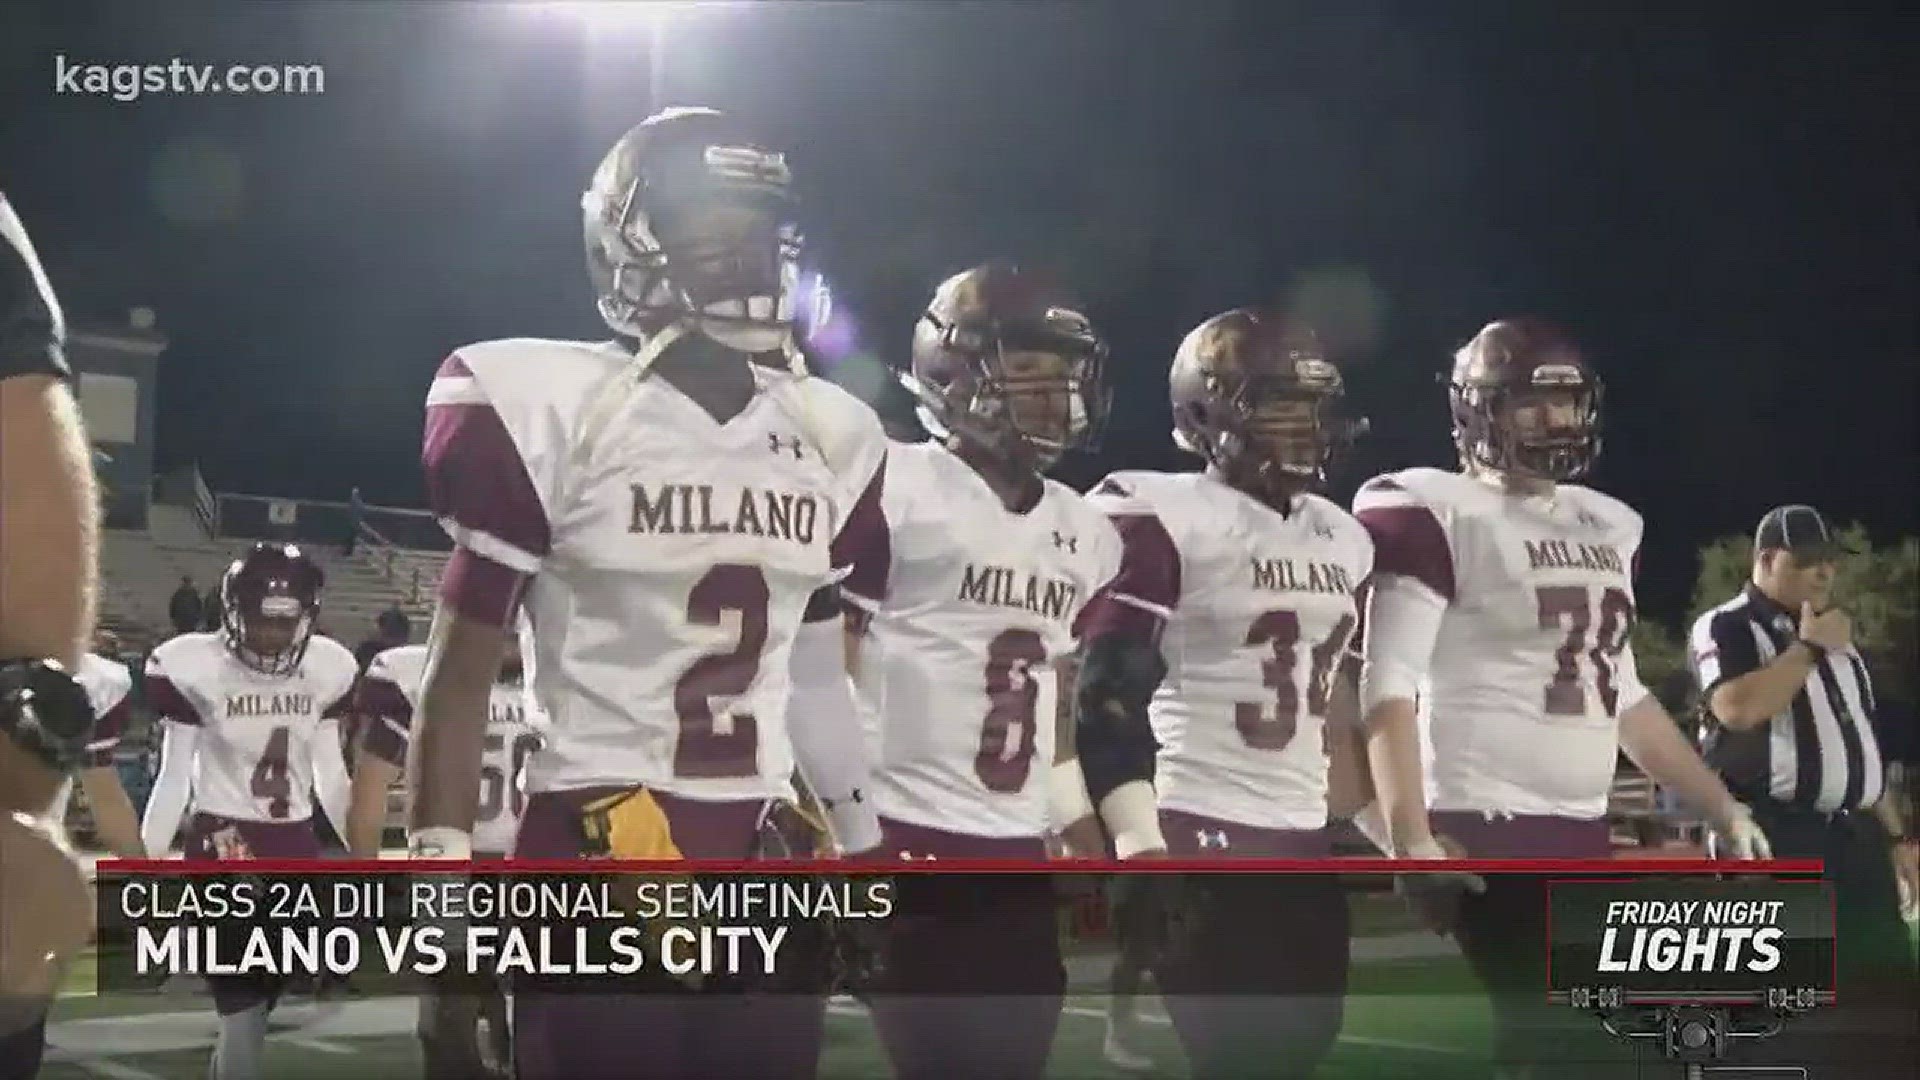 Falls City defeated Milano 40-20 to advance to face Burton in round 4.